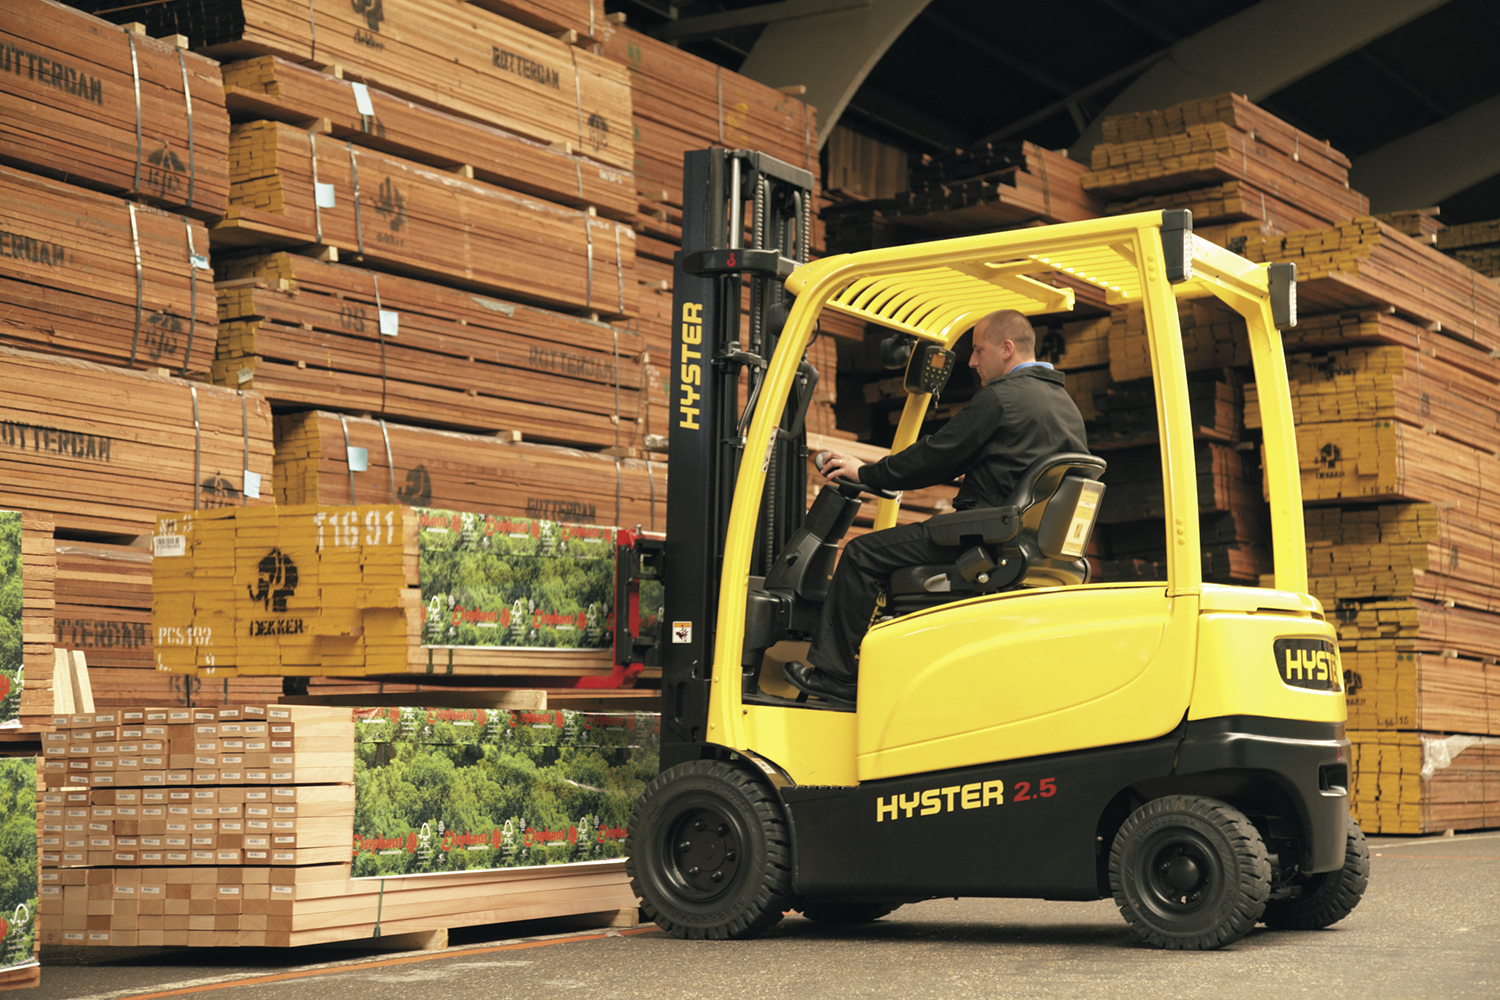 FUTURE-READY-HYSTER-LIFT-TRUCKS-FOR-THE-WOOD-INDUSTRY-A-1